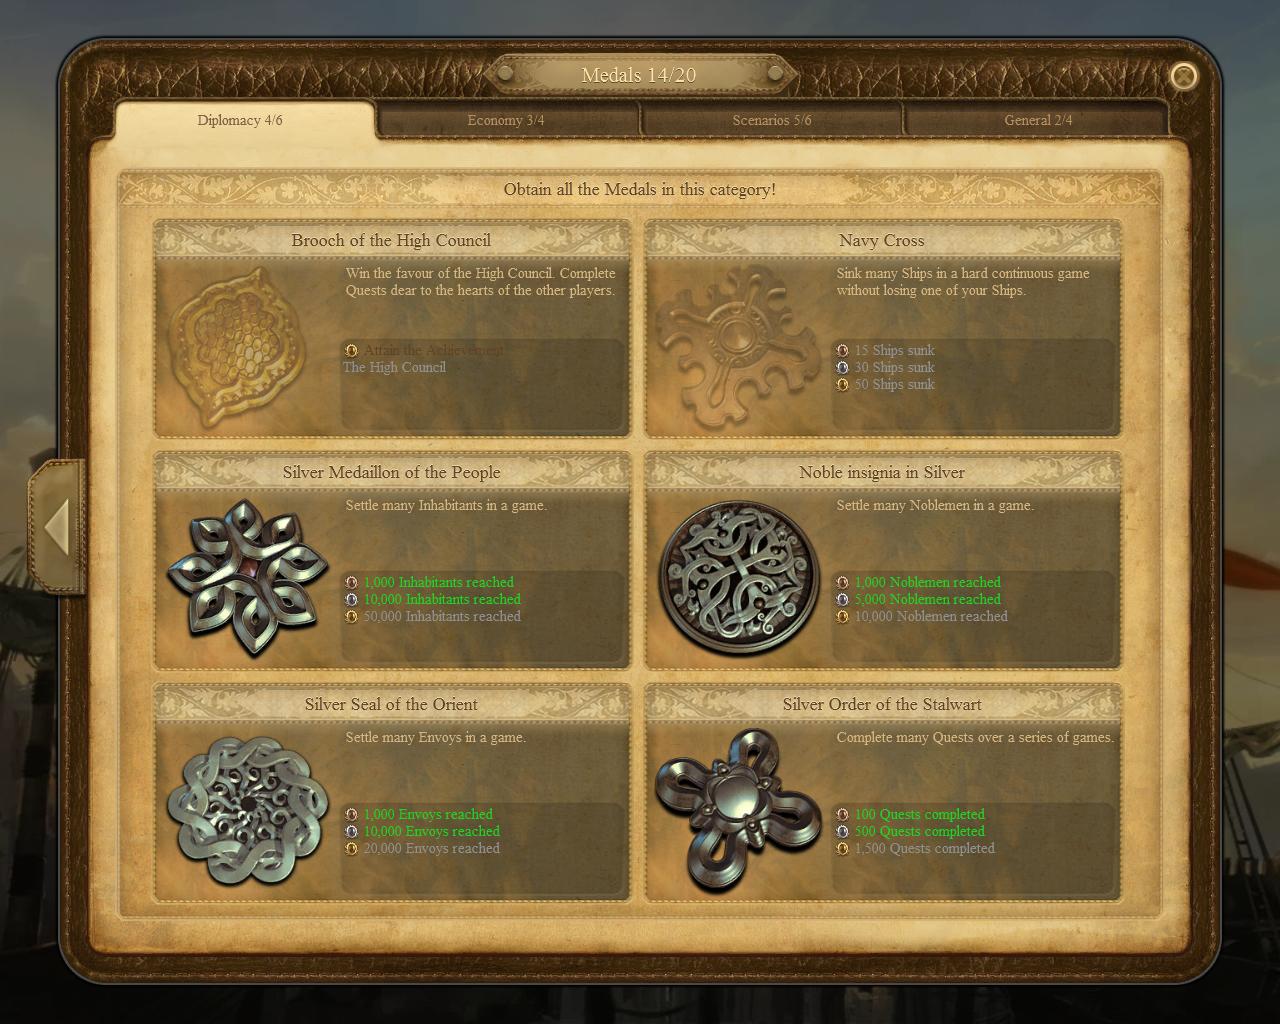 anno 1404 production chains